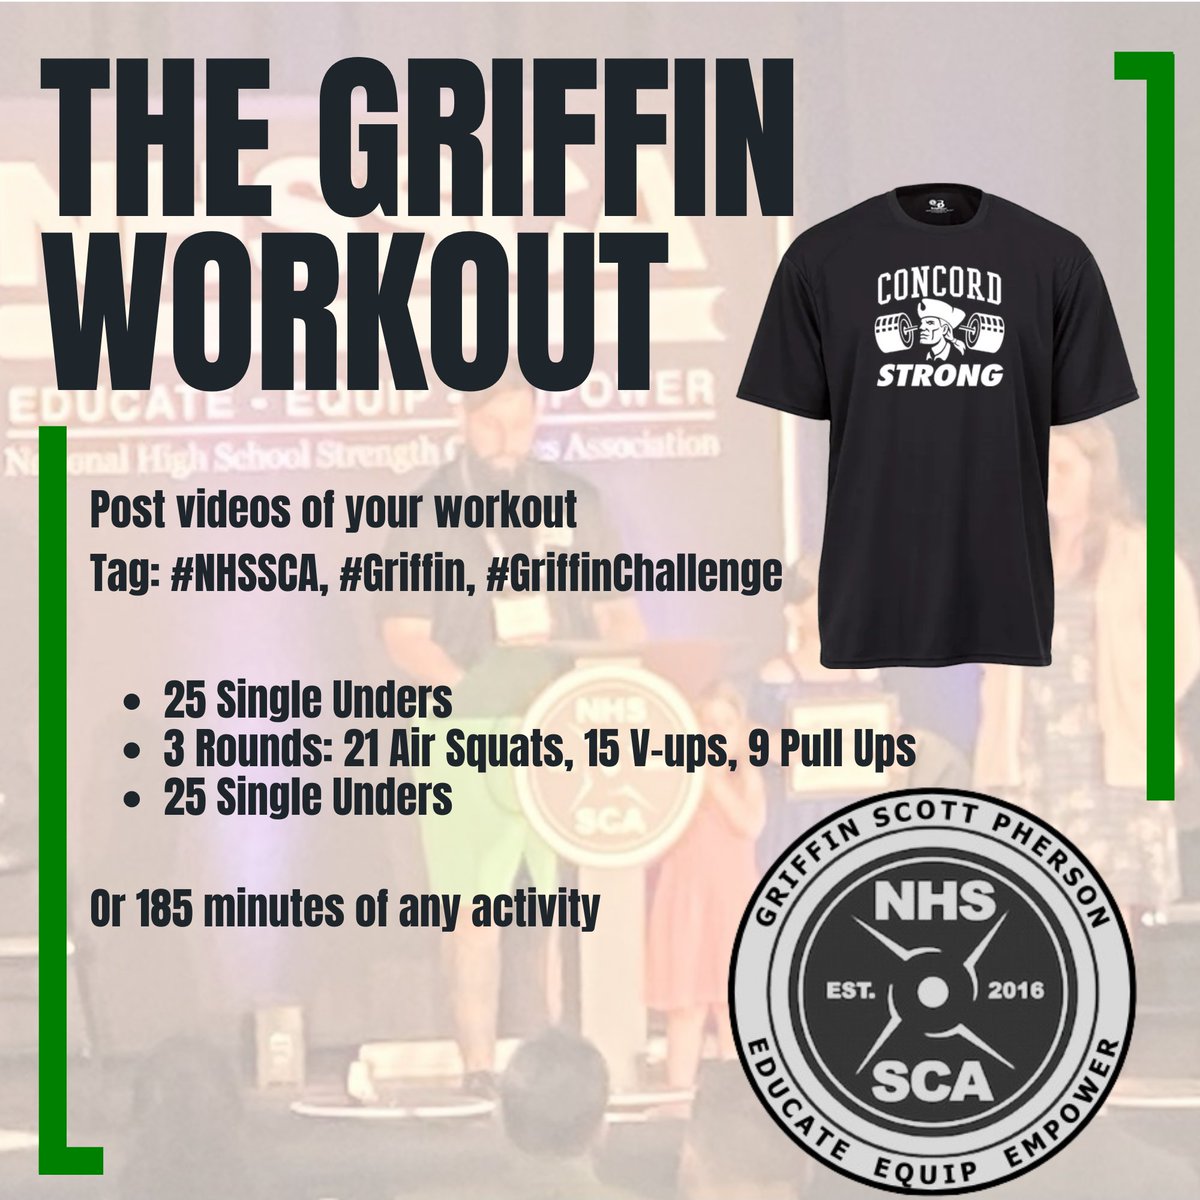 We are very lucky to have Coach Pherson @CoachPherson as part of our #Family and are grateful that we get to support him and Griff's legacy. Post a video of you/your kids doing a workout, tag #NHSSCA and #GriffinChallenge, and show your support for Coach Pherson and his family.